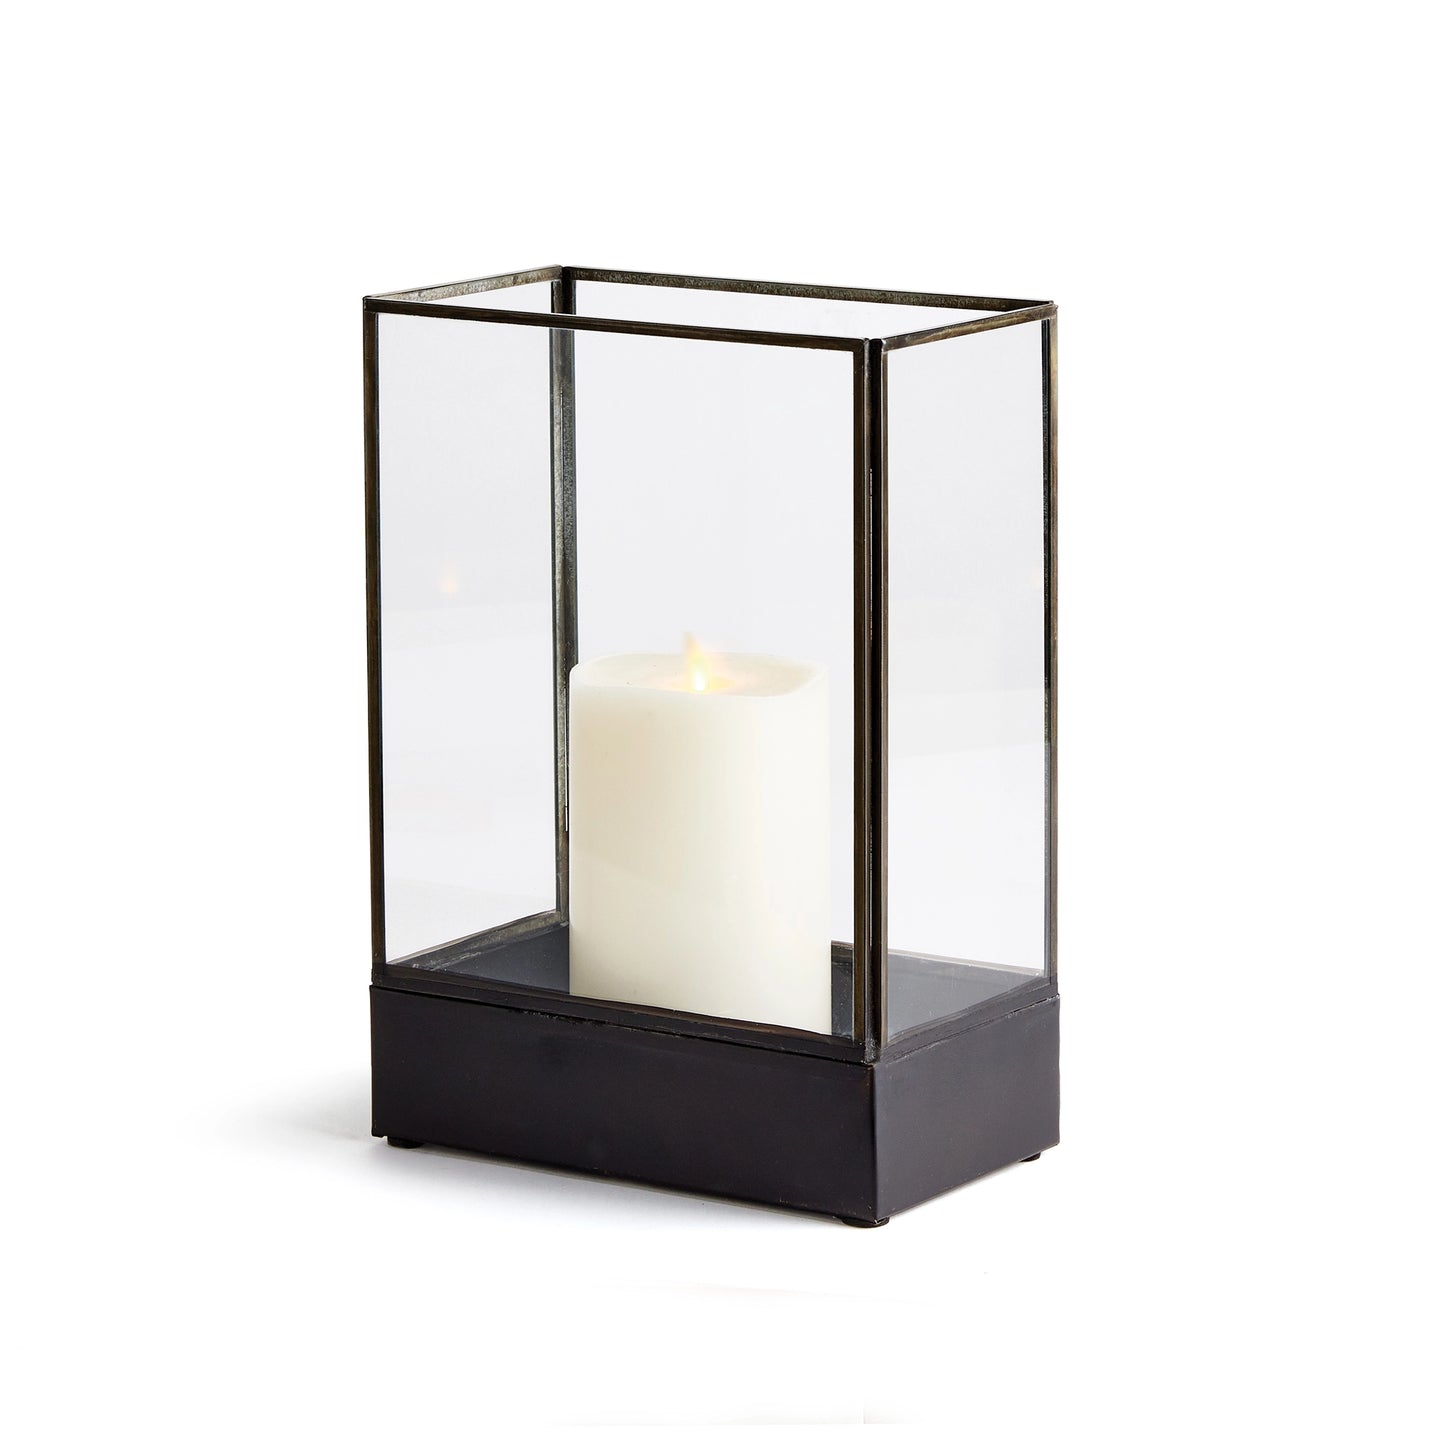 Small black brass hurricane candle holder with light gray background.